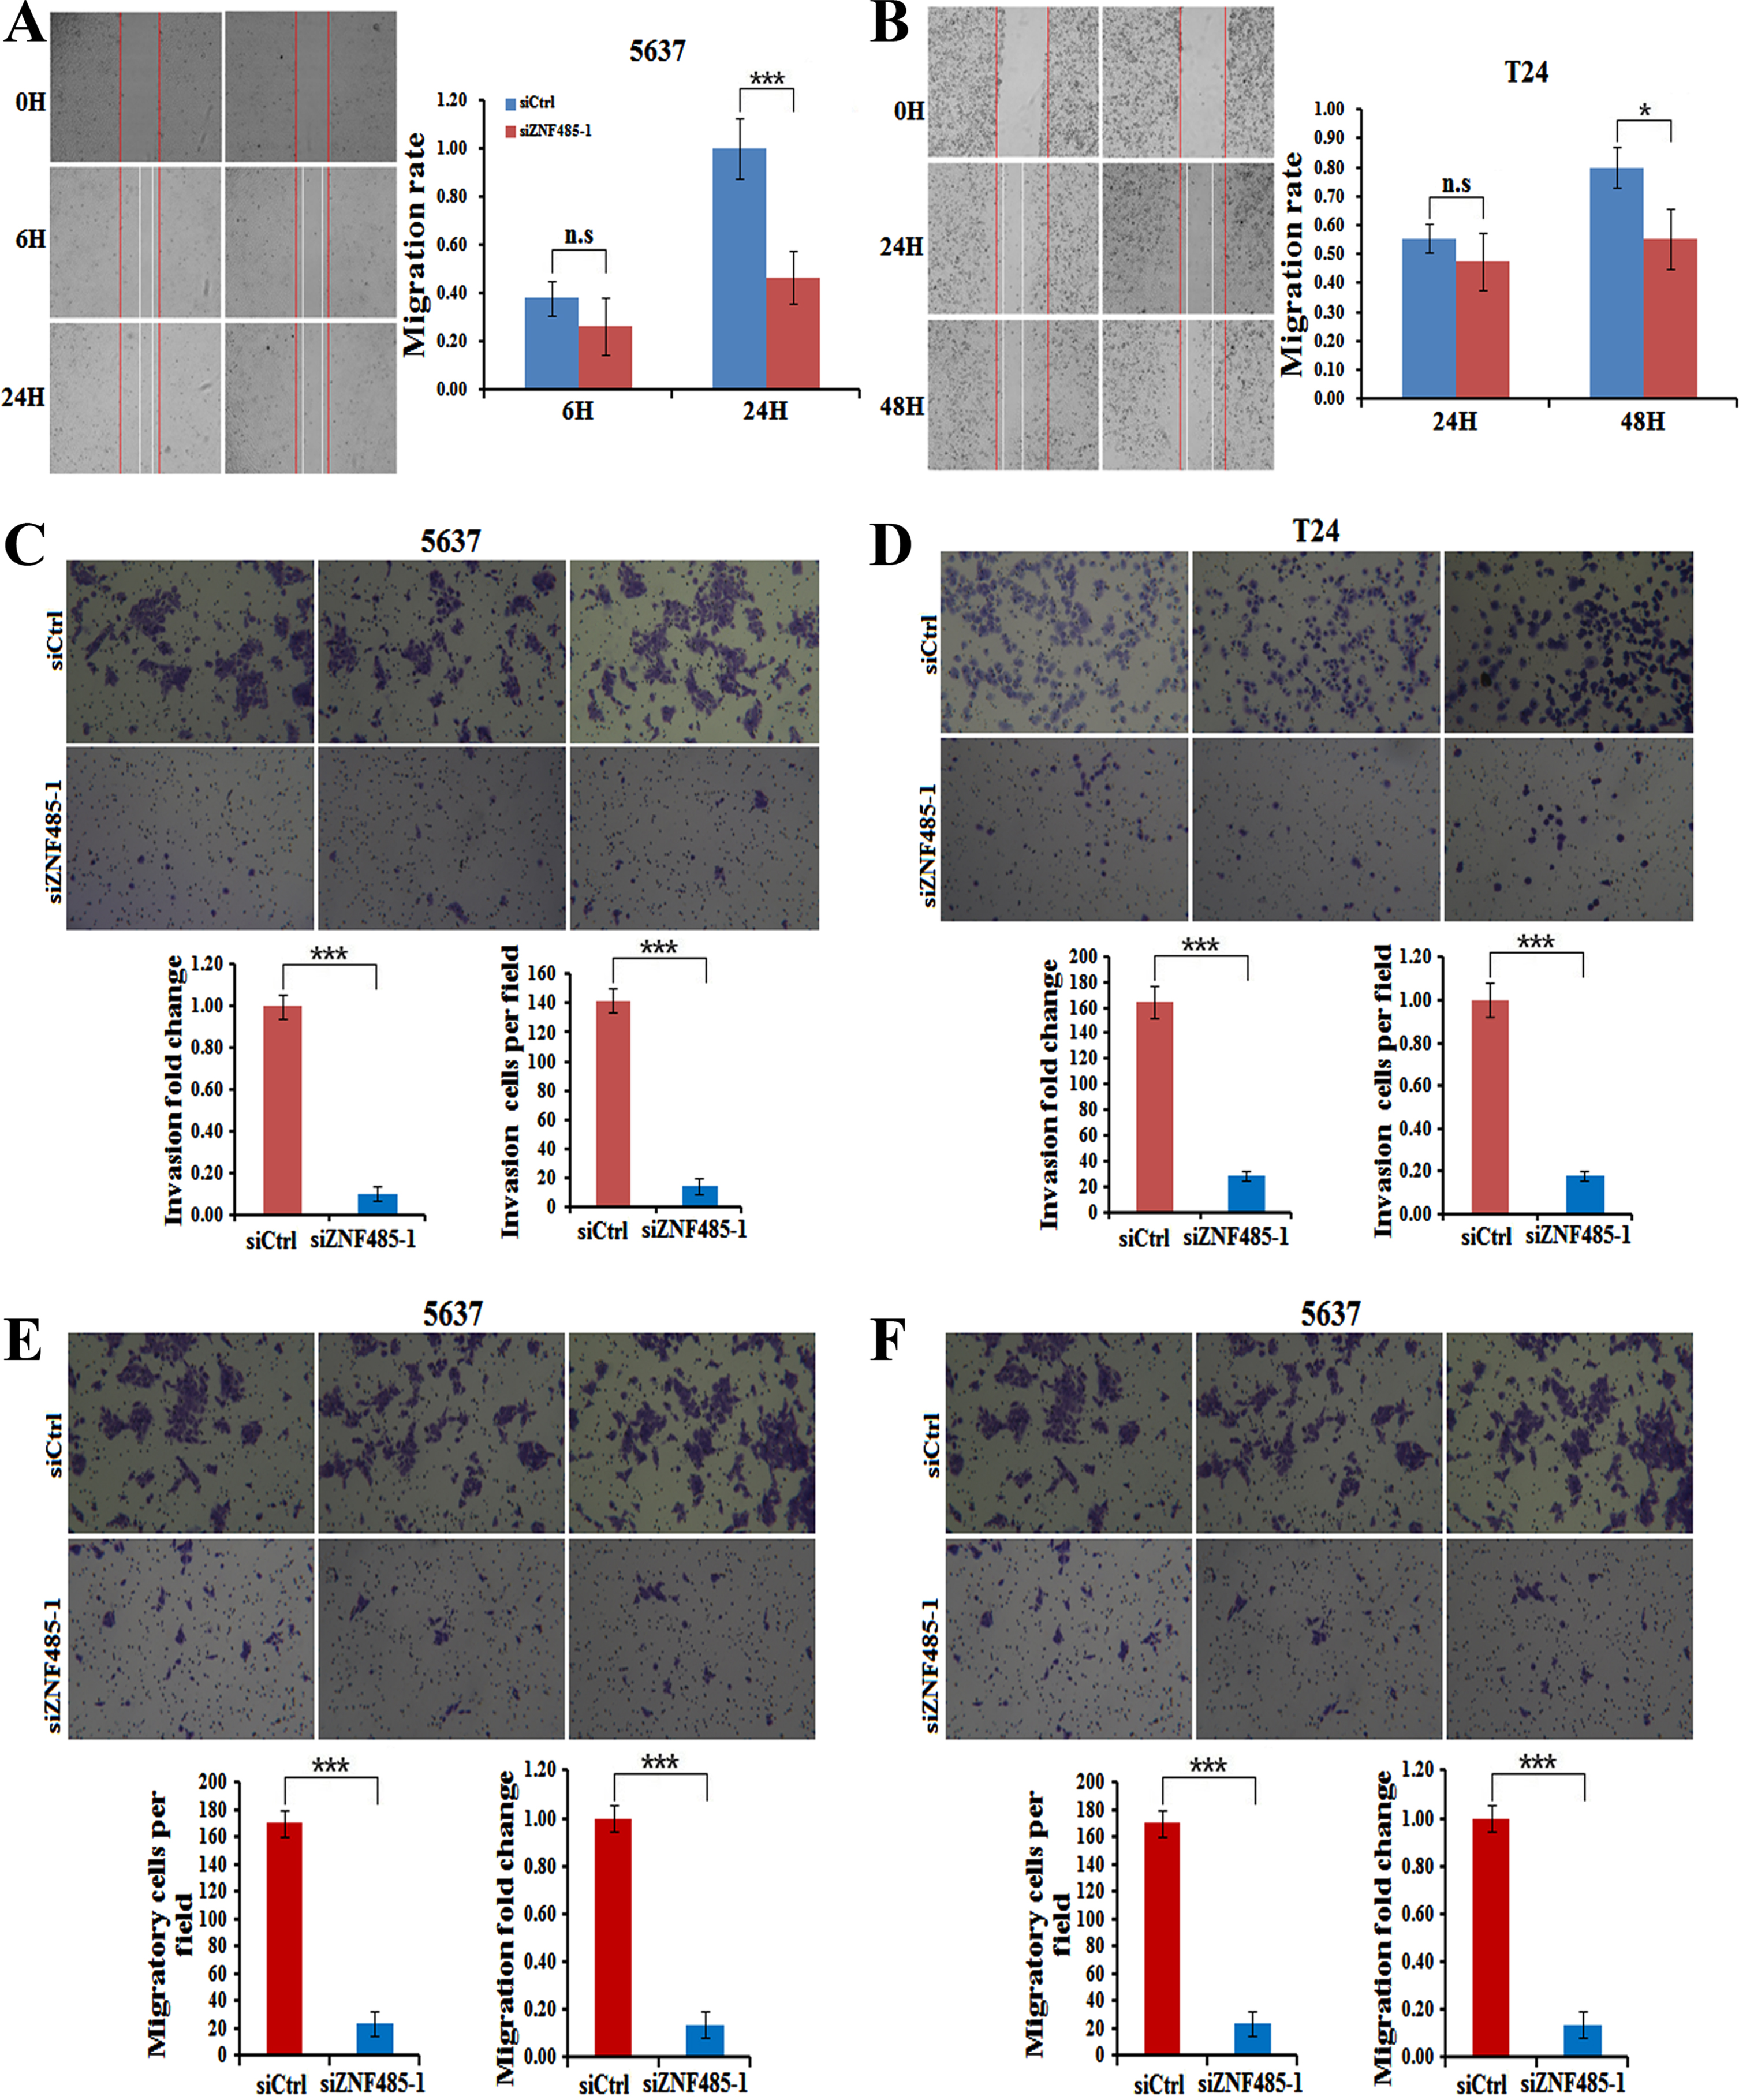 ZNF485 knockdown inhibits BLCA cell wound healing and invasion. (A) The wound healing assays showed that ZNF485 knockdown reduced the cell mobility of 5637 cells versus the negative control (siCtrl) for 48 hours, and the results were recorded (left) and quantitatively analyzed (right). ***, p value < 0.001. (B) The wound healing assays showed that ZNF485 knockdown reduced the cell mobility of T24 cells versus the negative control (siCtrl) for 48 hours (left) and quantitatively analyzed (right). *, p value < 0.05. (C) Representative images (left) and quantification (right) of invasion assays showed that ZNF485 knockdown reduced the invasion of 5637 cells versus the negative control (siCtrl) at 36 hours. *, p value < 0.05. Scale bar: 100μm. (D) Representative images (left) and quantification (right) of invasion assays showed that ZNF485 knockdown reduced the invasion of T24 cells versus the negative control (siCtrl) at 36 hours. *, p value < 0.05. Scale bar: 100μm. (E) Representative images (left) and quantification (right) of migration assays showed that ZNF485 knockdown reduced the migration of 5637 cells versus the negative control (siCtrl) for 36 hours. *, p value < 0.05. Scale bar: 100μm. (F) Representative images (left) and quantification (right) of migration assays showed that ZNF485 knockdown reduced the migration of T24 cells versus the negative control (siCtrl) for 36 hours. *, p value < 0.05. Scale bar: 100μm.